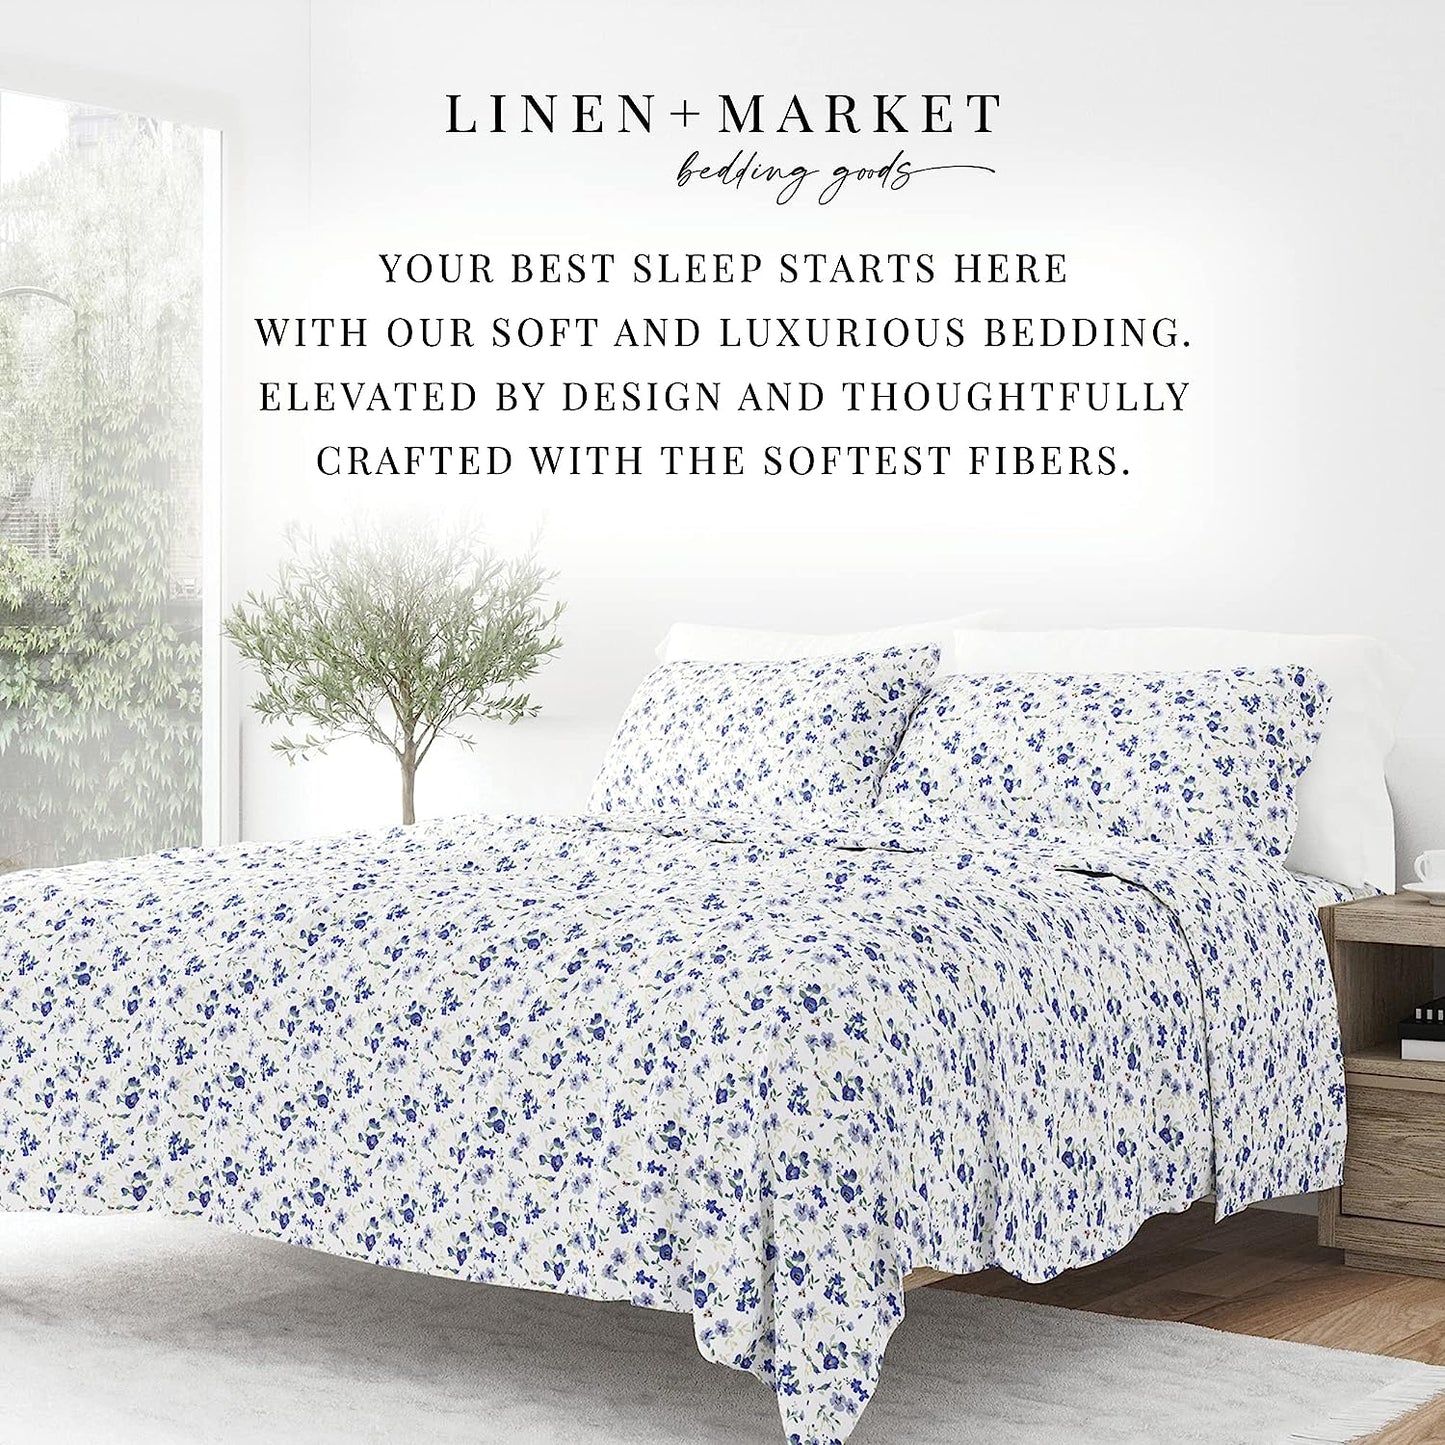 Linen Market 4 Piece Cal King Bedding Sheet Set (Light Blue Floral) - Sleep Better Than Ever with These Ultra-Soft & Cooling Bed Sheets for Your Cal King Size Bed - Deep Pocket Fits 16" Mattress